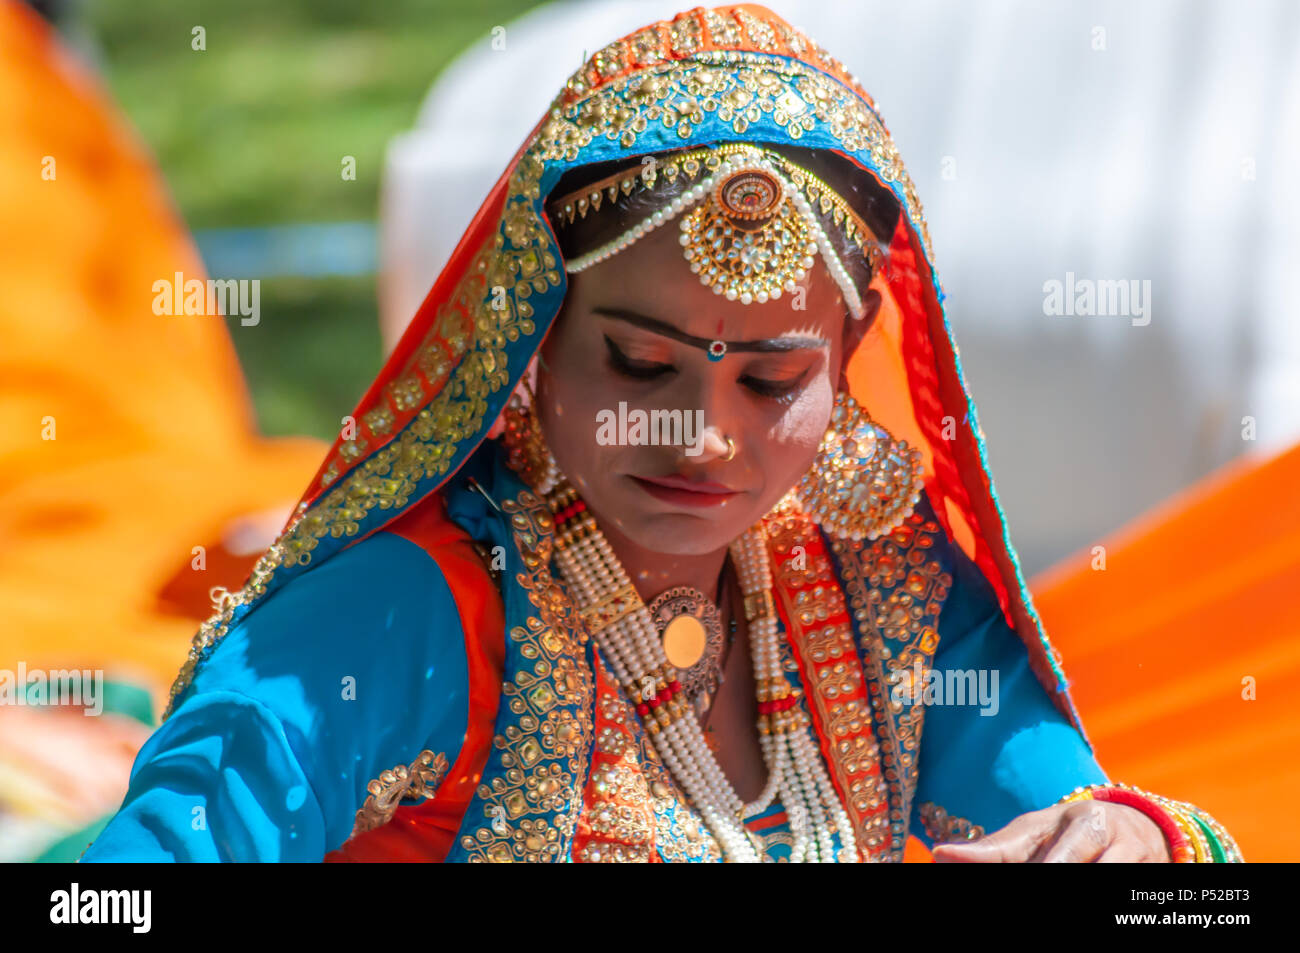 Glasgow, Scotland, UK. 24th June, 2018. A member of D & F Bros Grand Indian  Circus performing at Glasgow Mela, an annual multicultural music festival  held in Kelvingrove Park. This year's performers